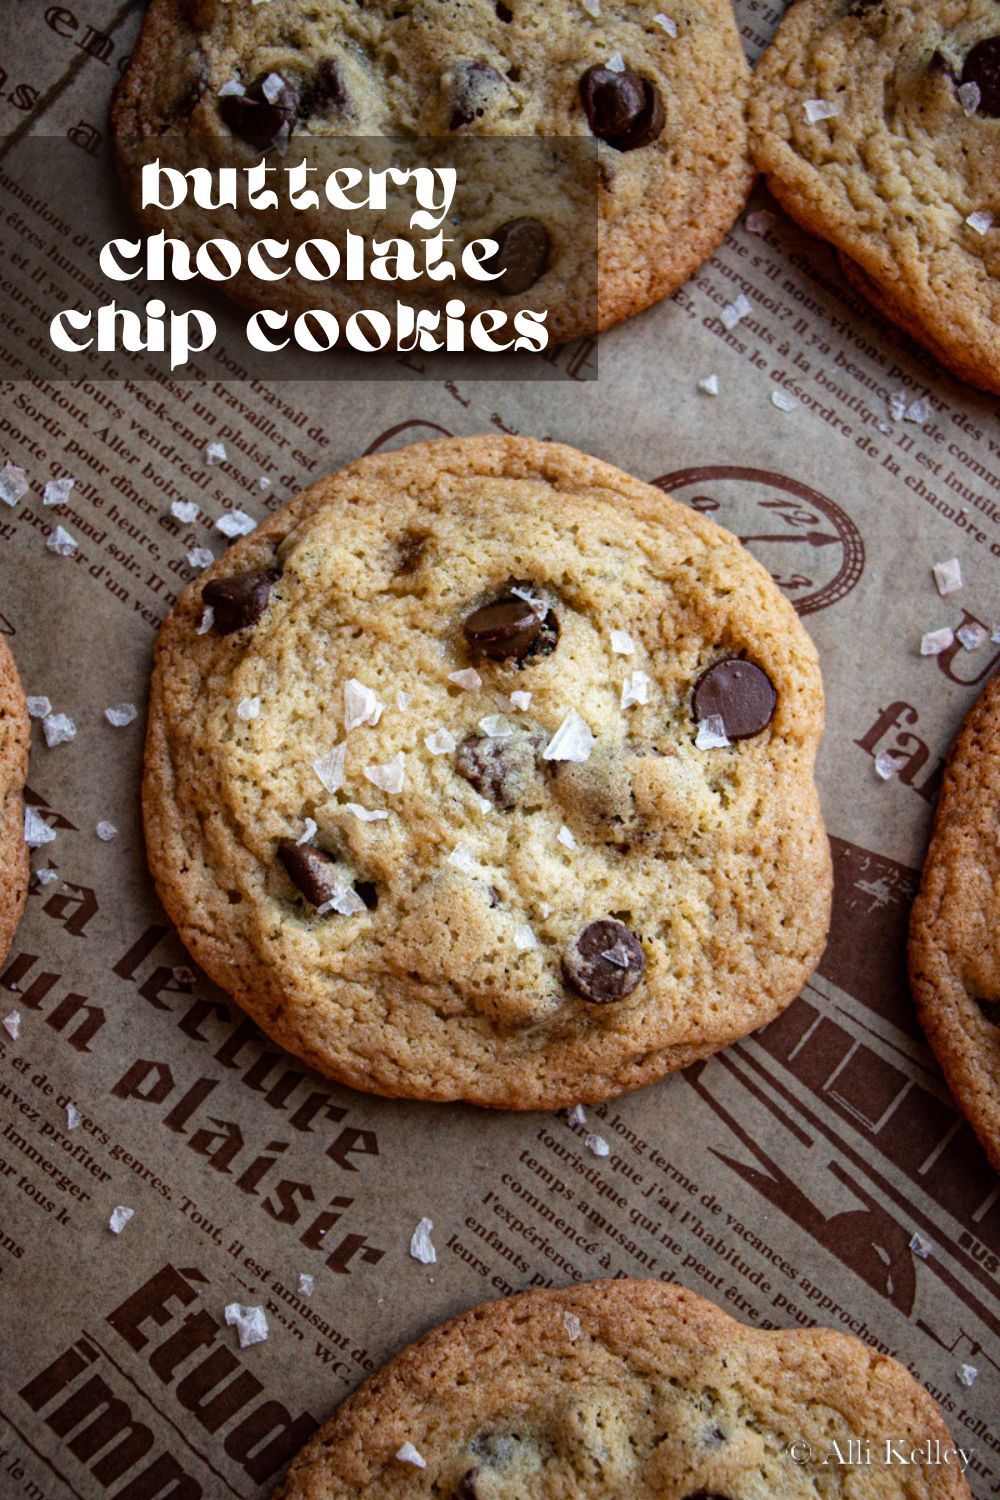 These buttery chocolate chip cookies are something special! Sweet chocolate chips wrapped in a buttery crumb, these cookies will leave your taste buds begging for more! Nothing can compare to that first bite - the subtle crunch and chewy texture of the cookie, full of delicious chocolate chips is truly irresistible.